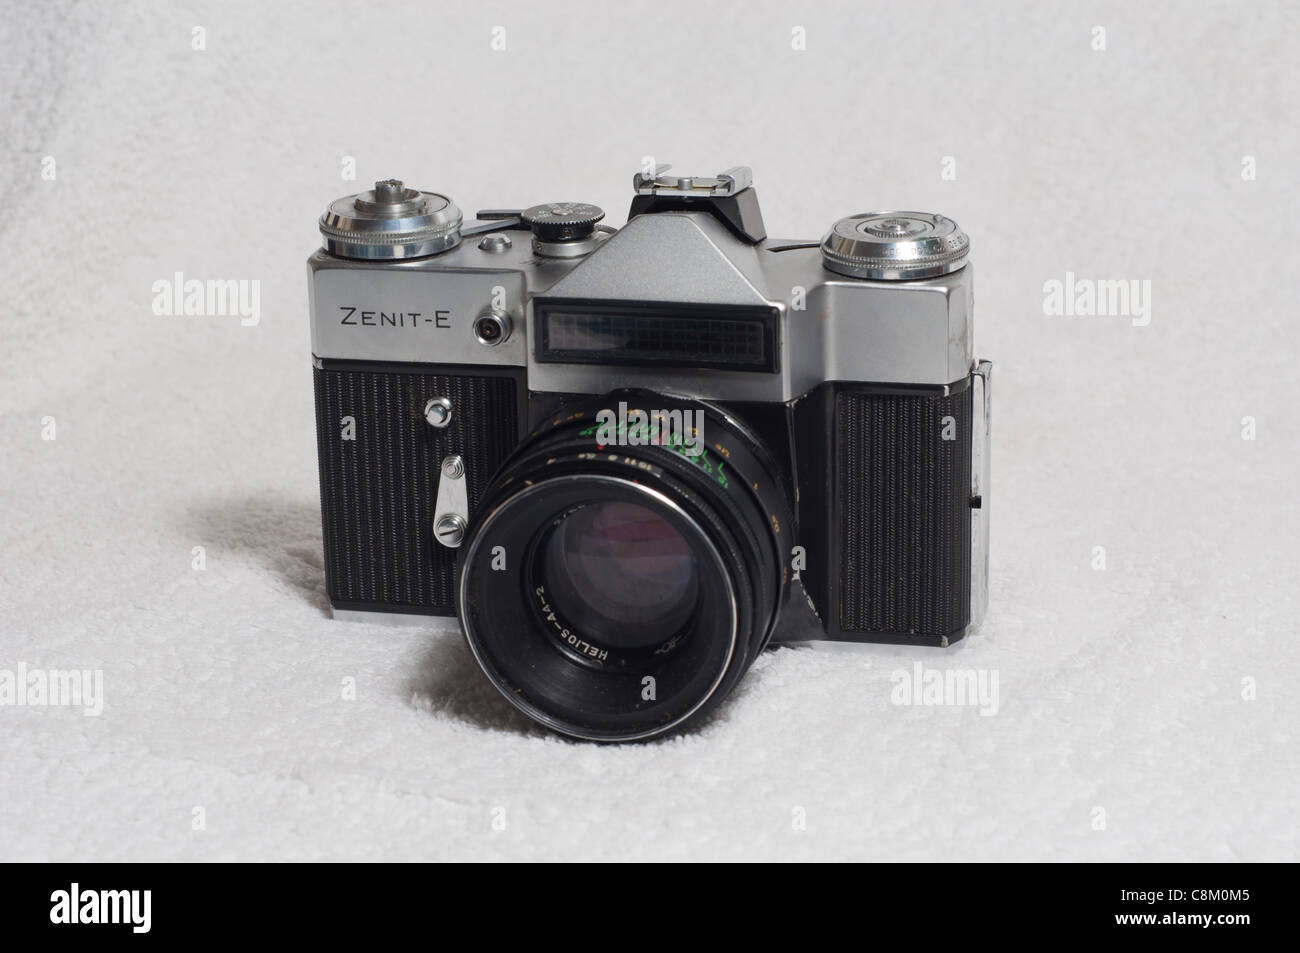 Zenit-E is a 35mm film SLR made by KMZ Stock Photo